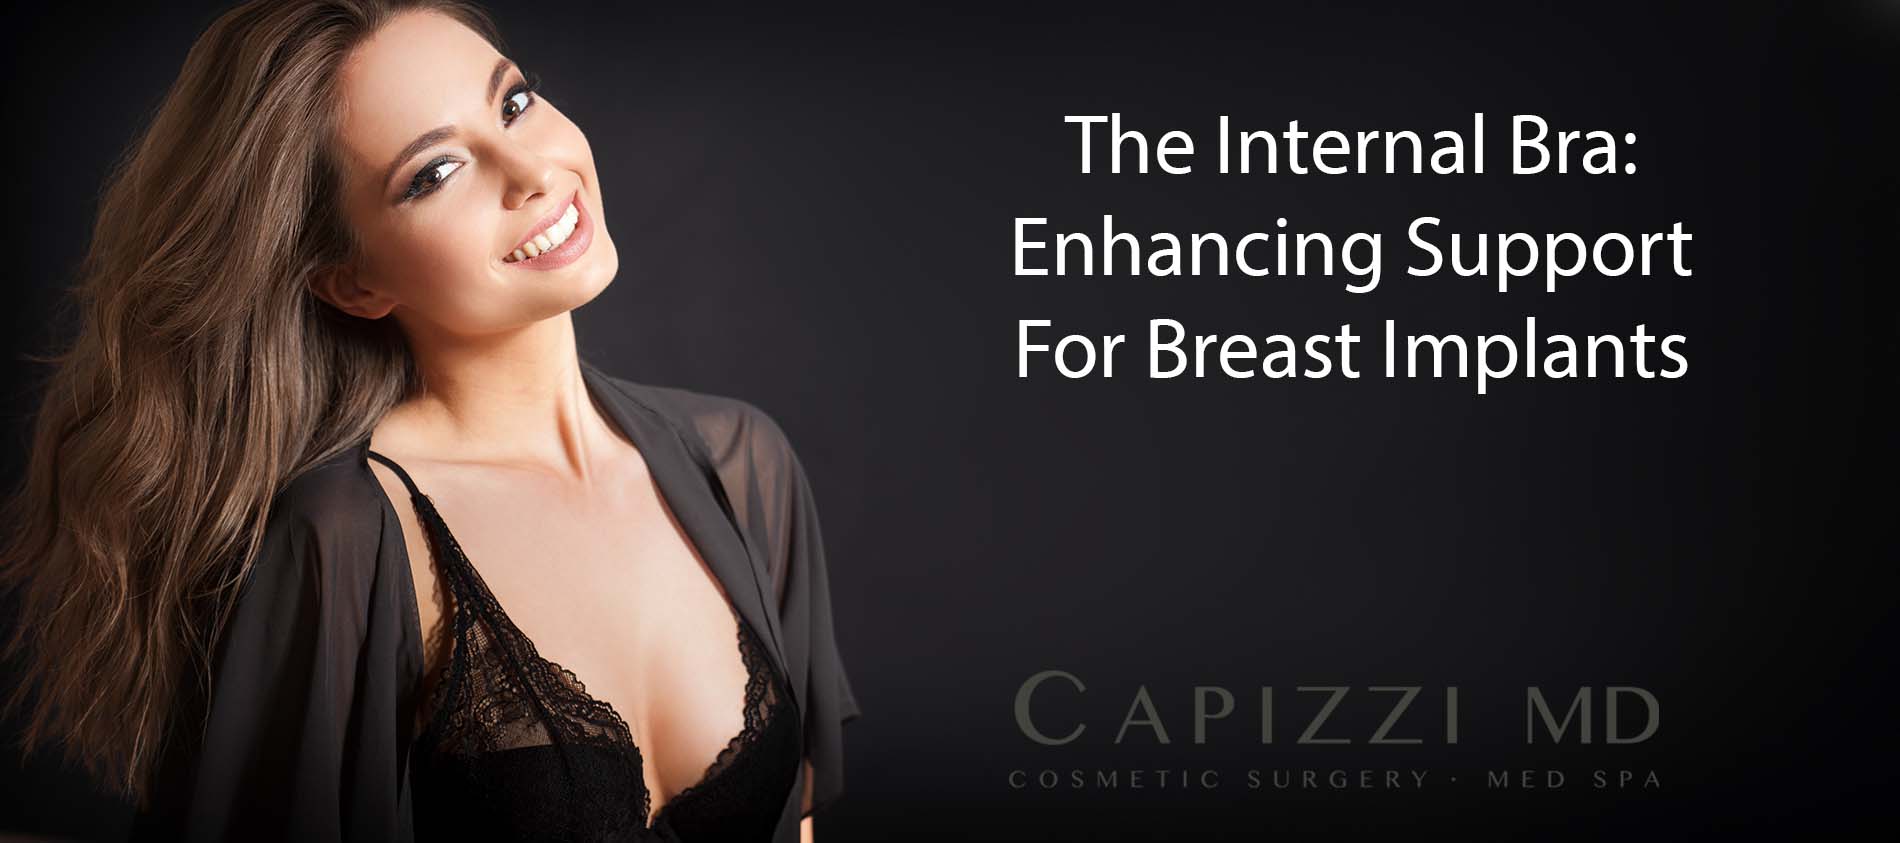 The Internal Bra: Enhancing Support For Breast Implants - Capizzi MD